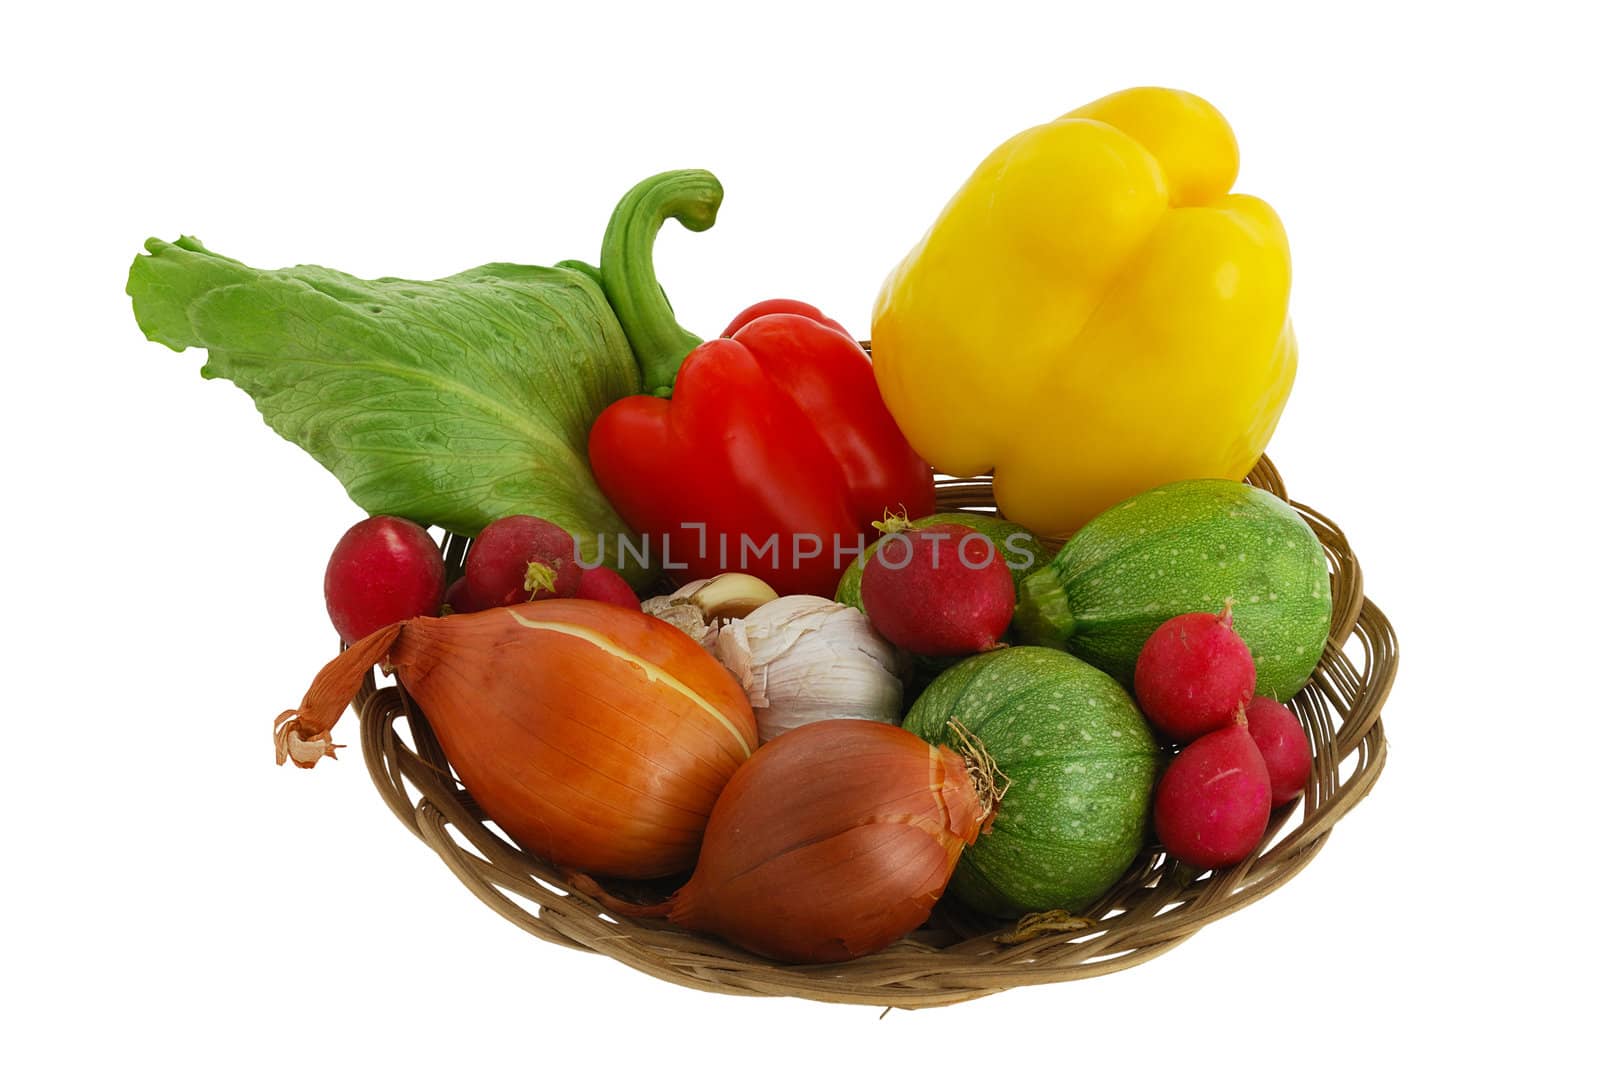 Harvested vegetables mix including  radish, sweet peppers, garlic, onion, lettuce  and squash in straw bowl isolated on white background